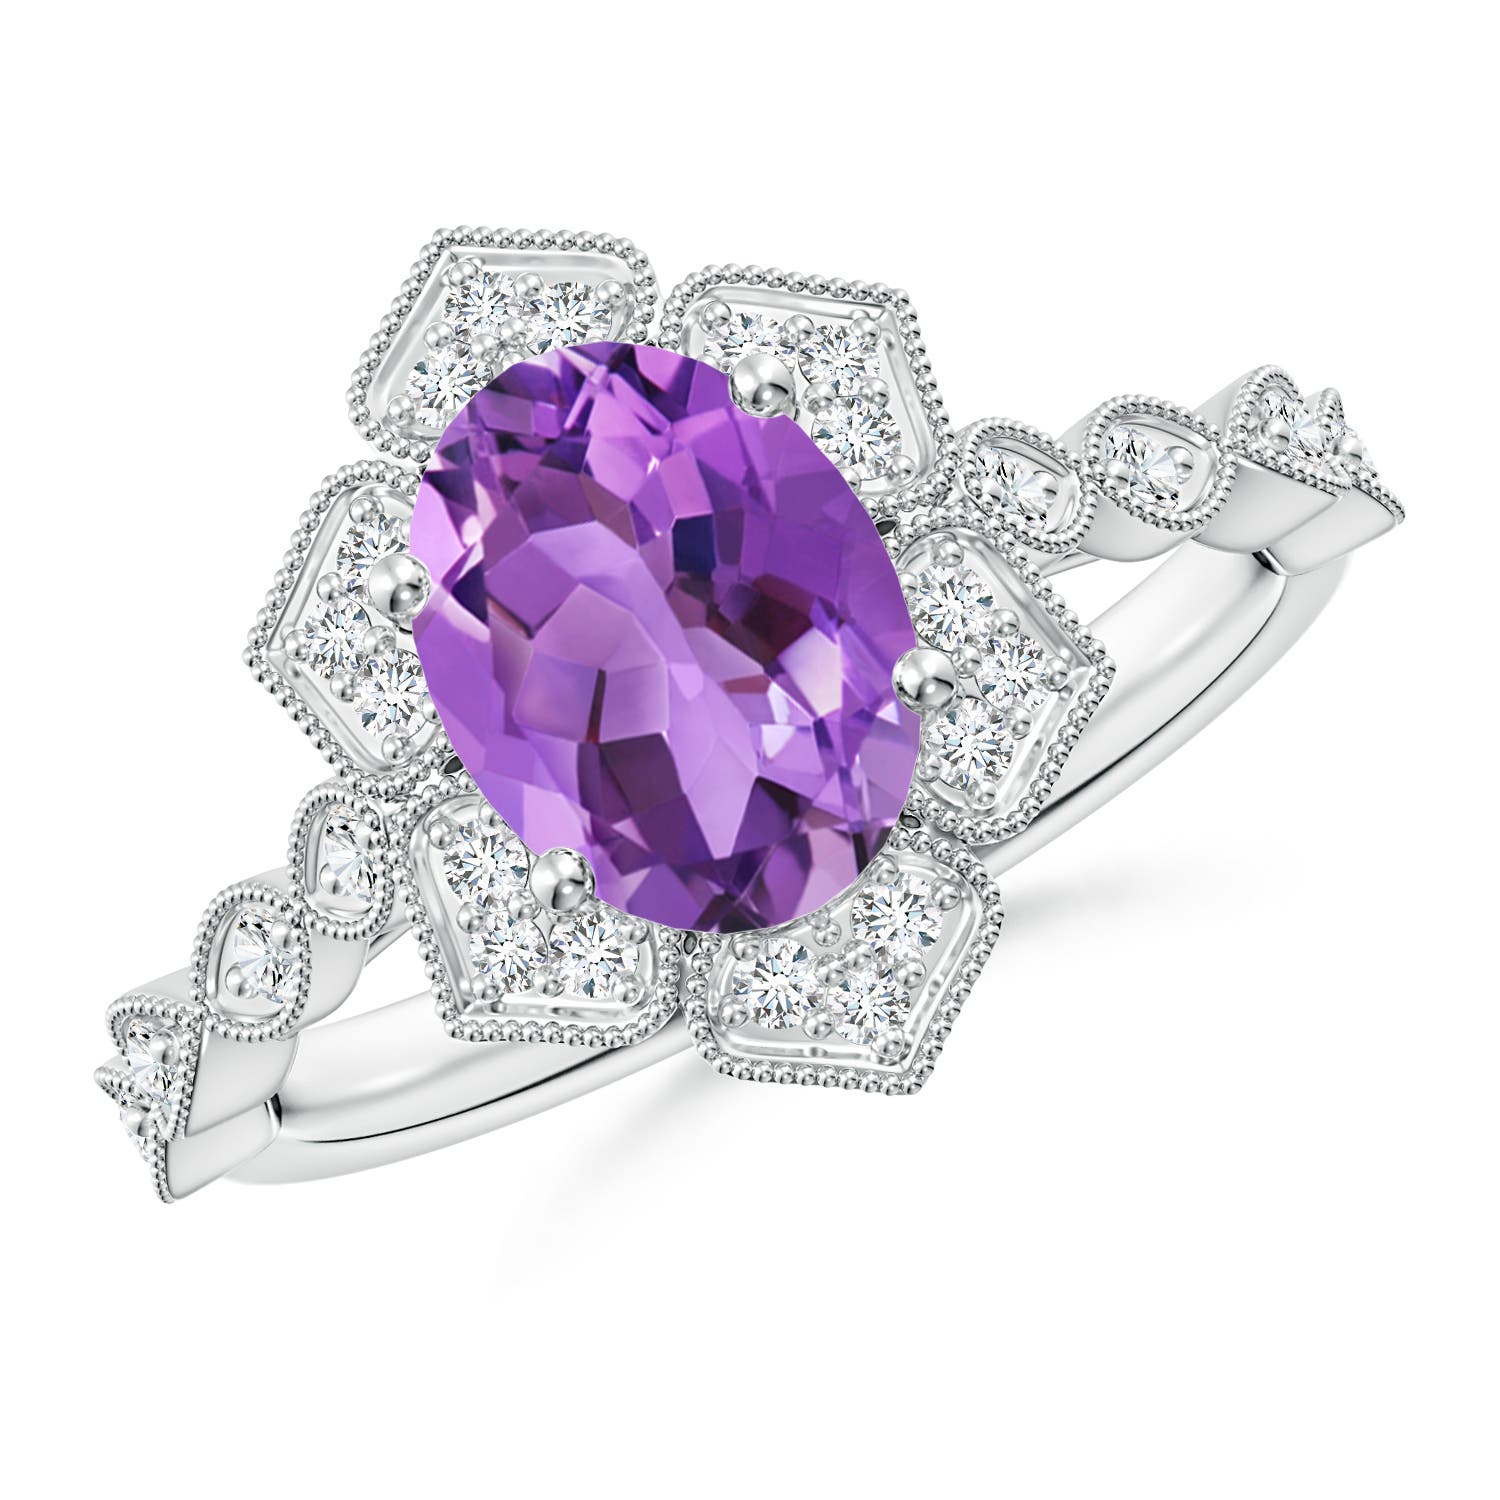 AA - Amethyst / 1.86 CT / 14 KT White Gold